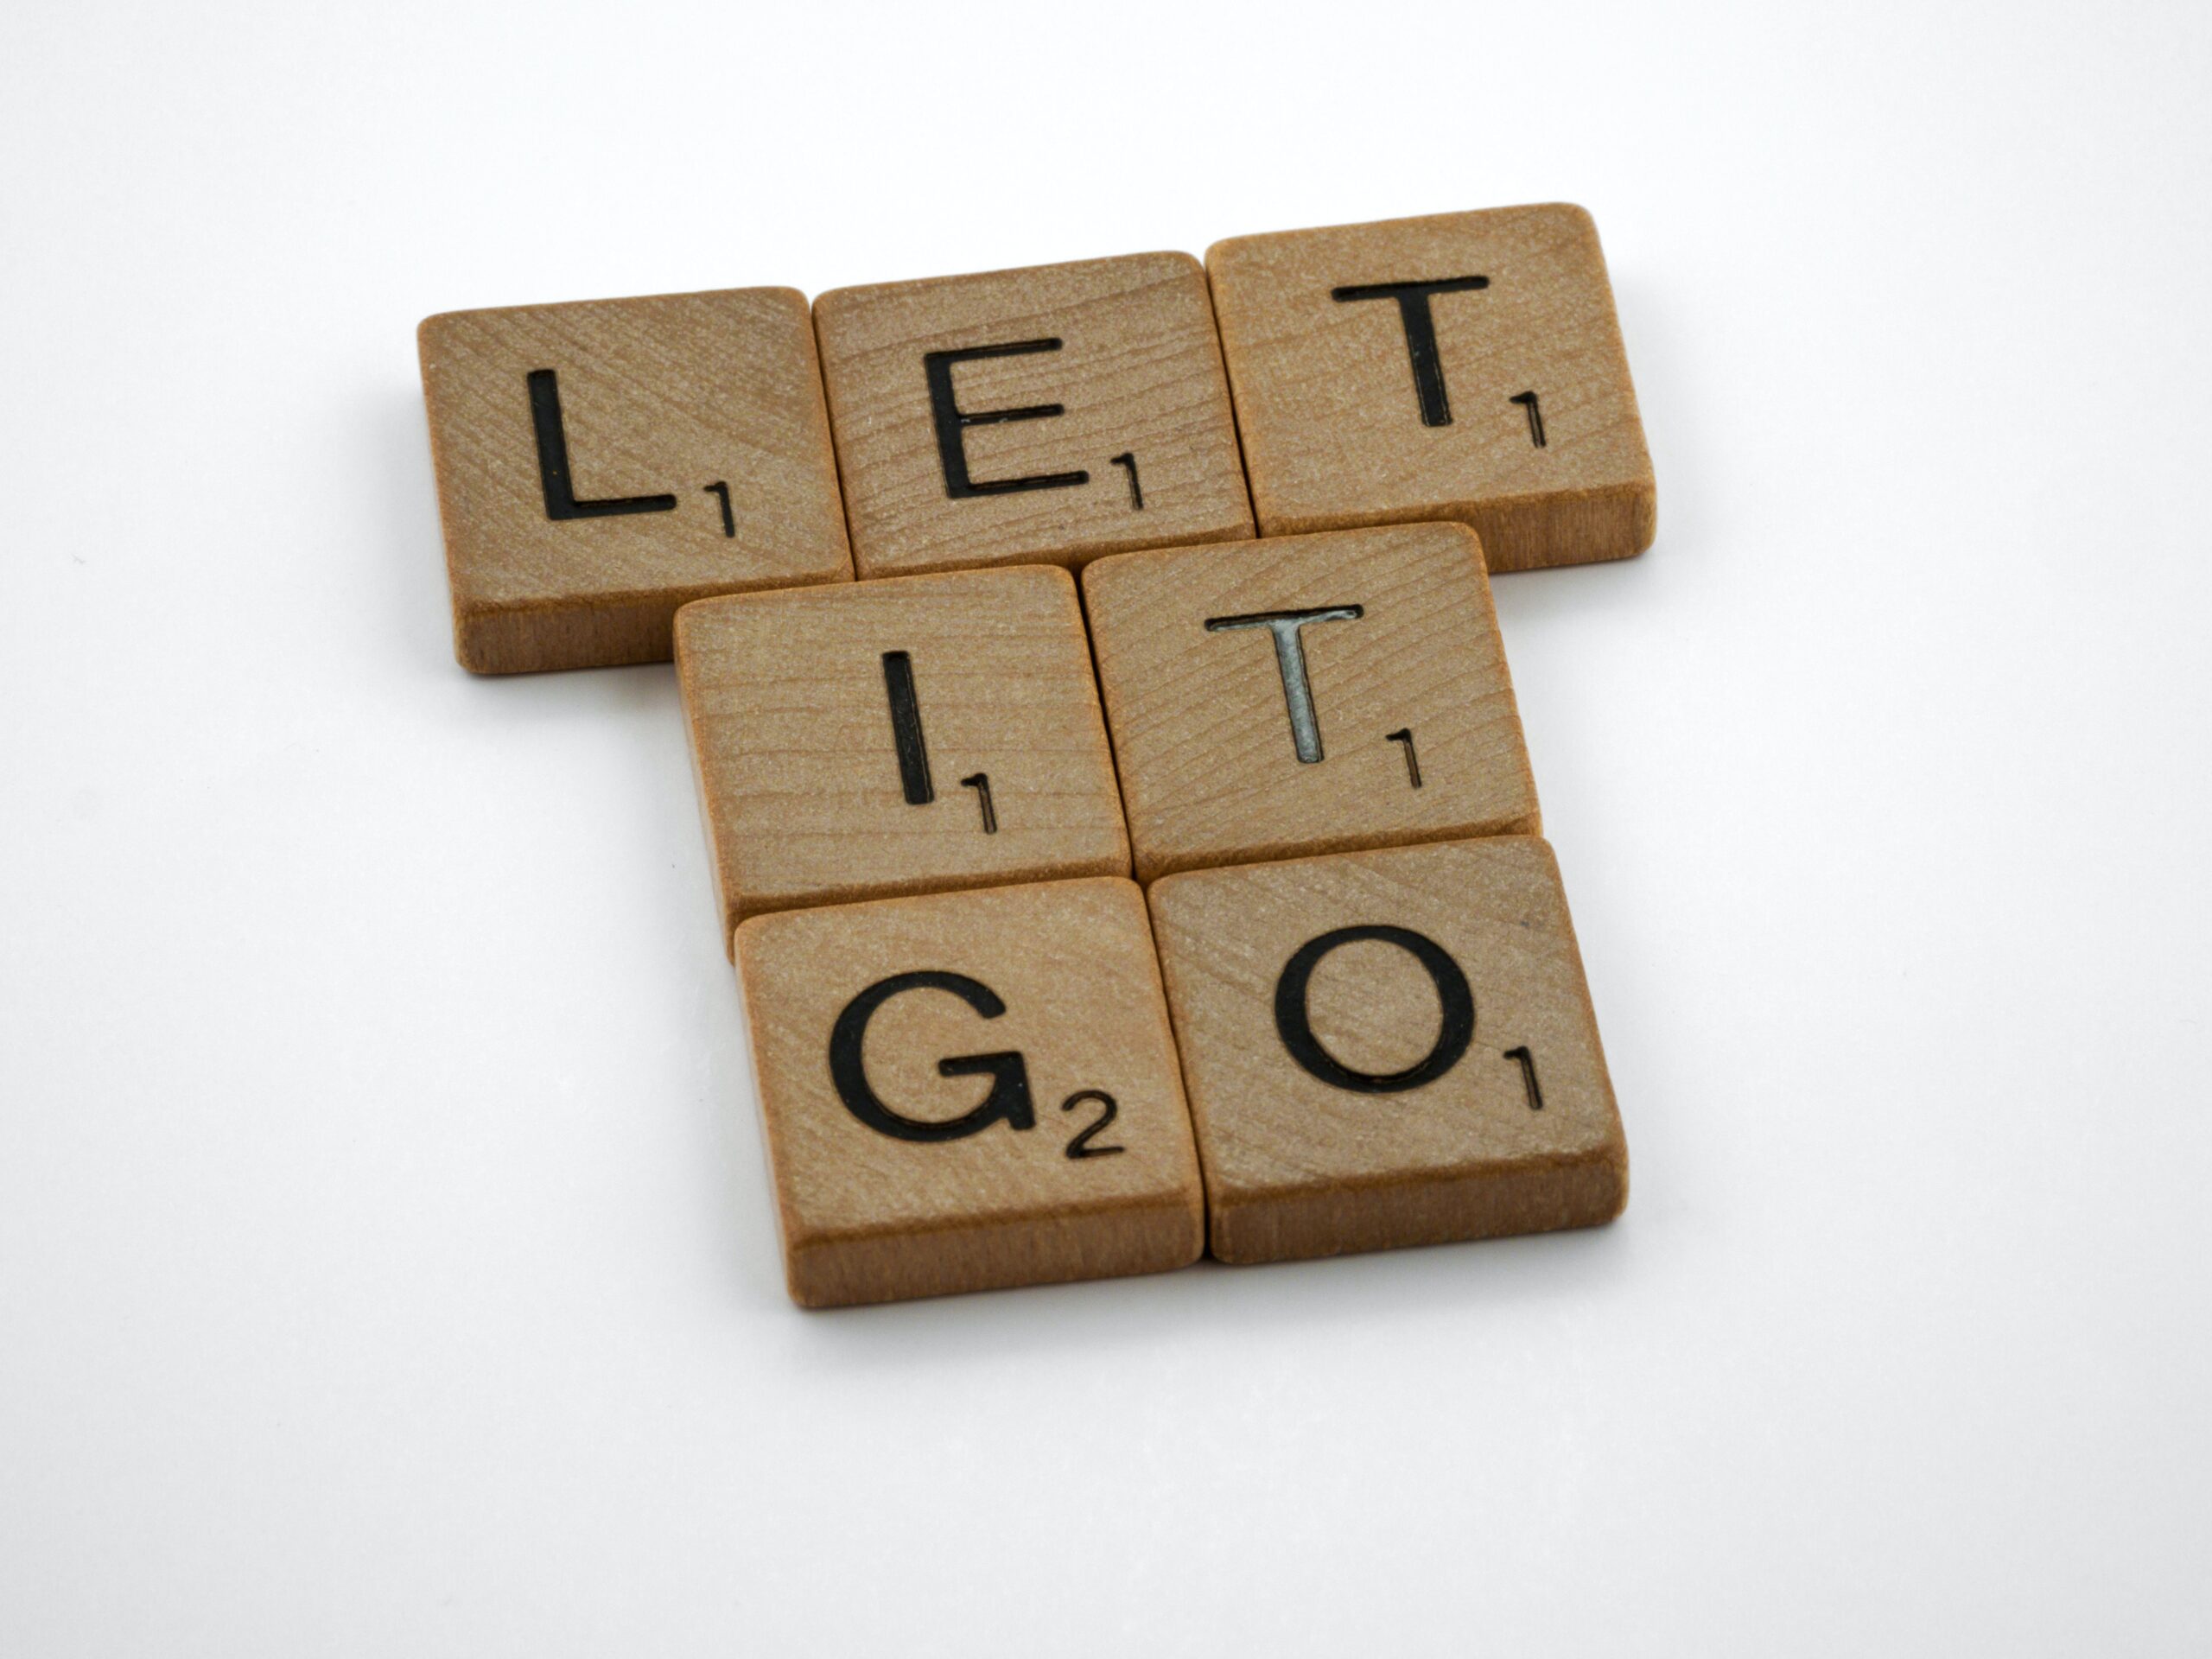 7 Valuable Lessons about Letting Go